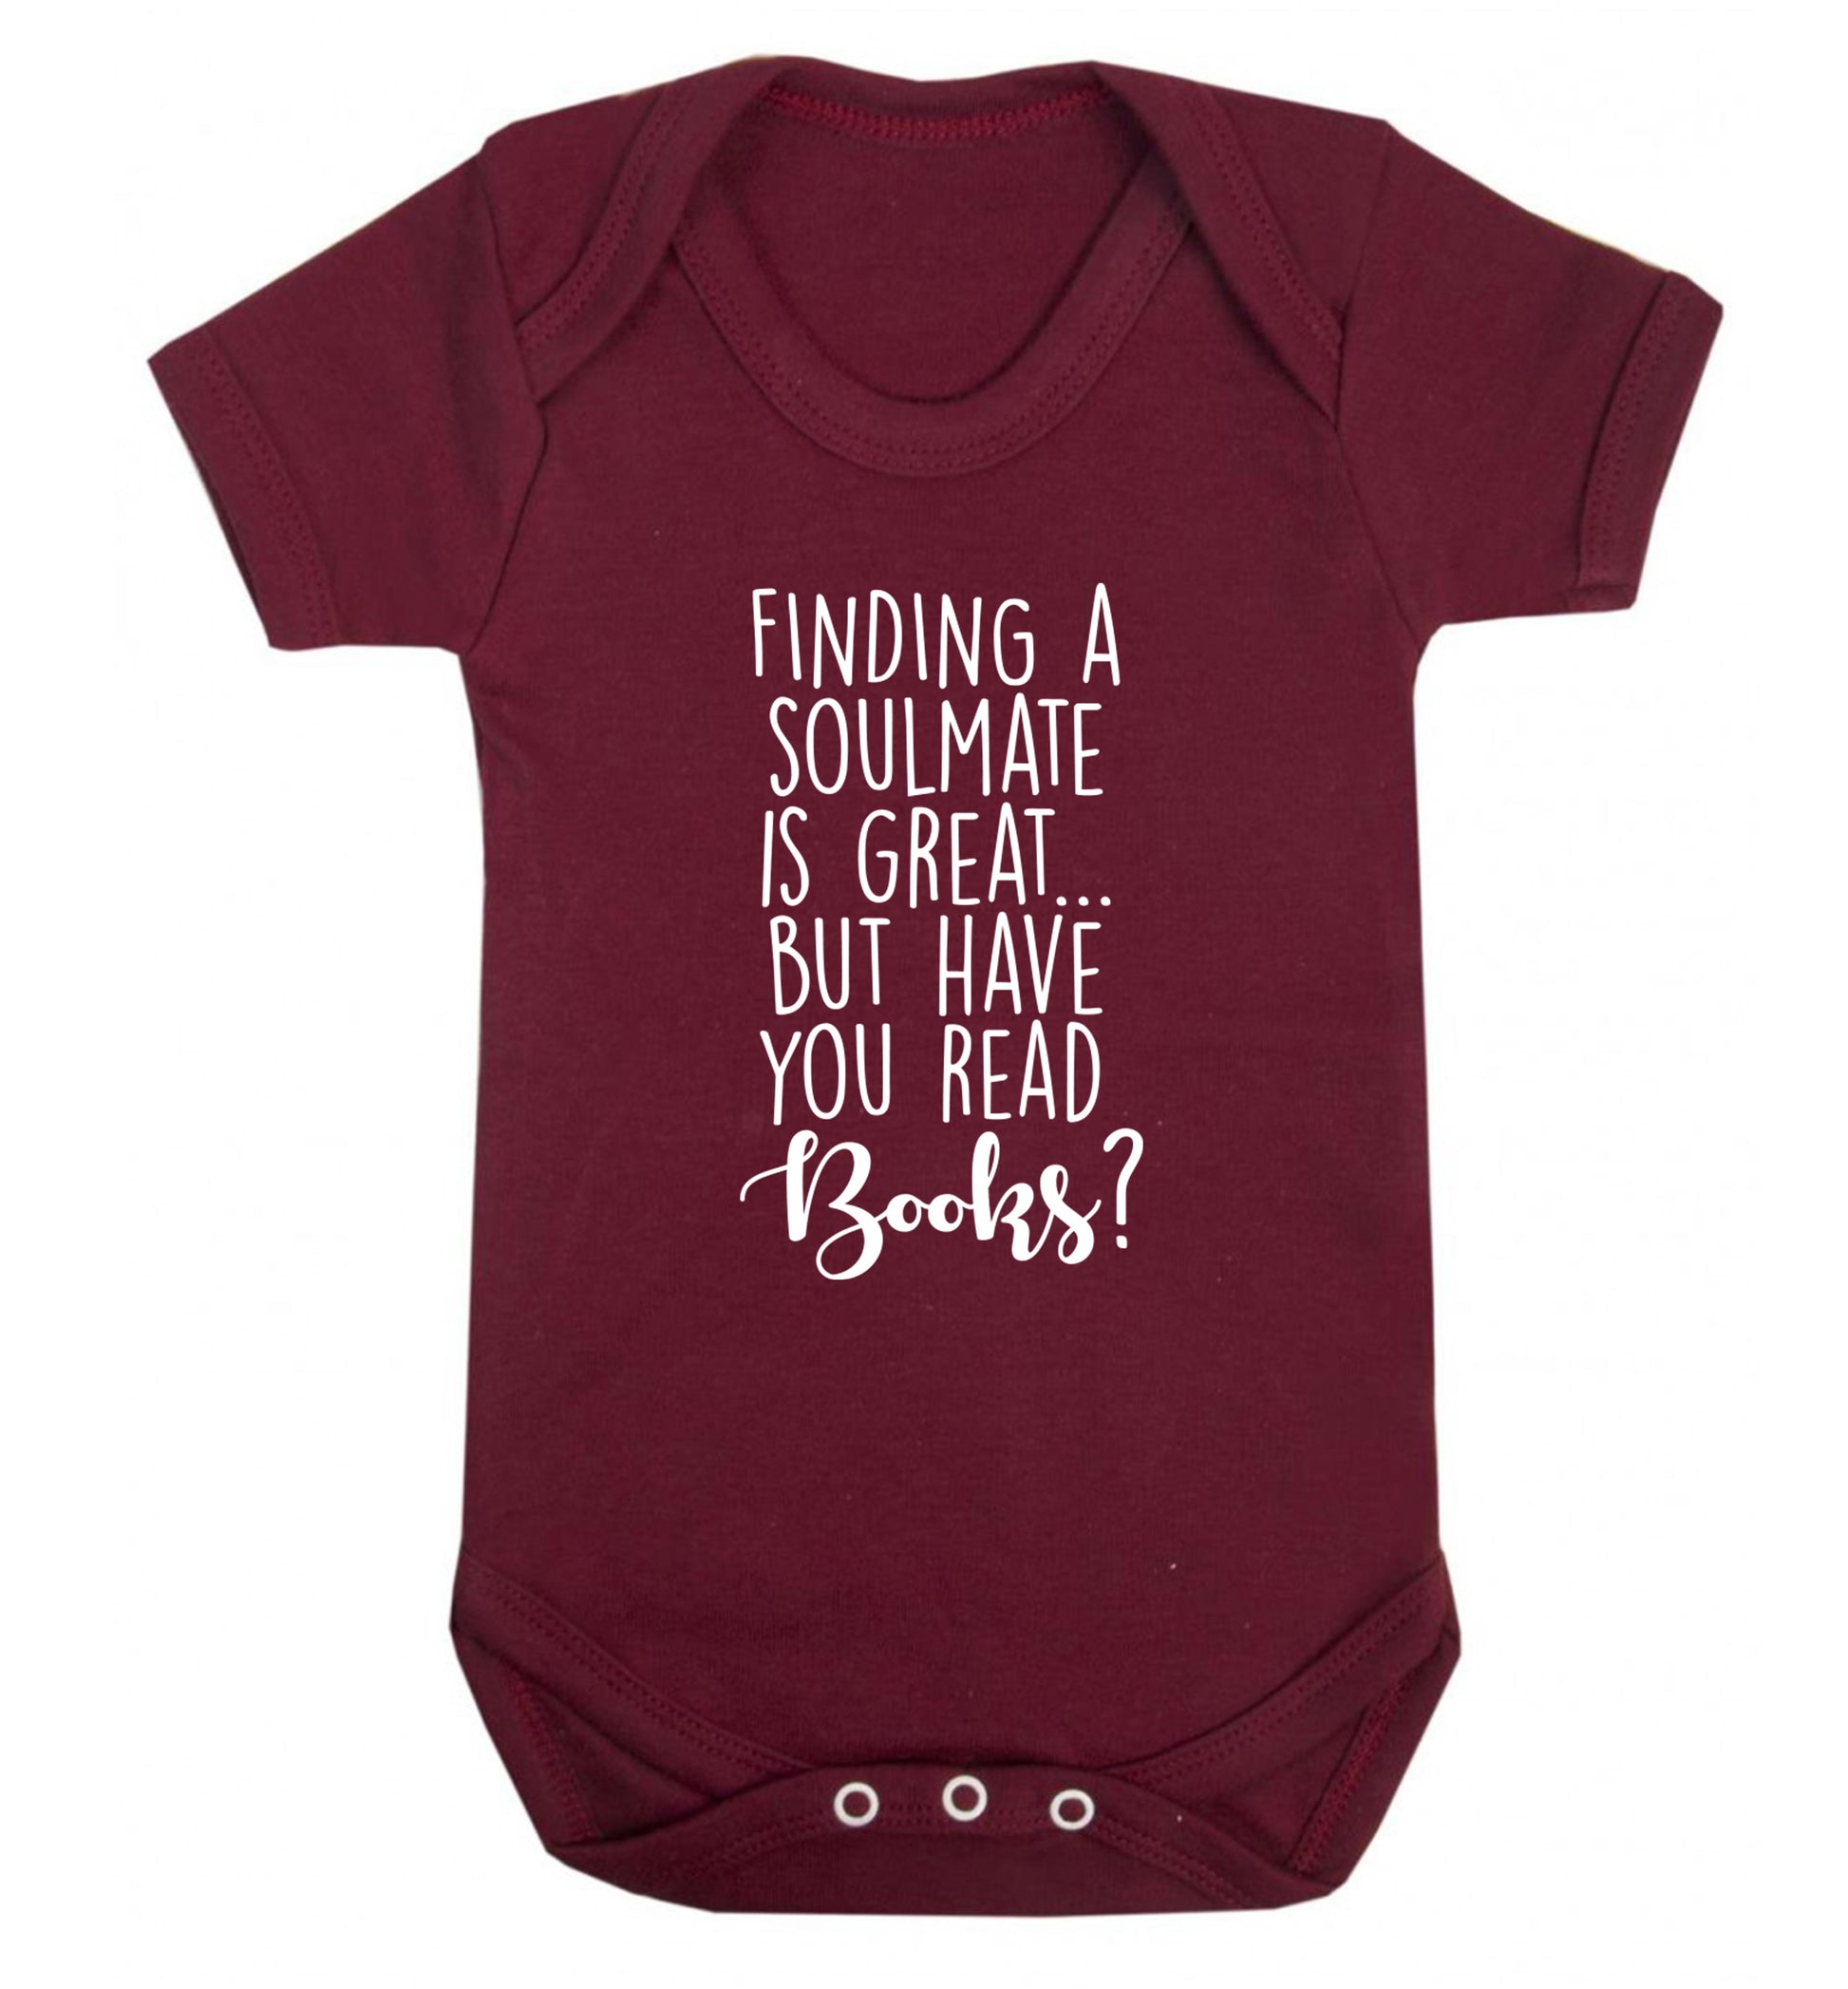 Finding a soulmate is great but have you read books? Baby Vest maroon 18-24 months